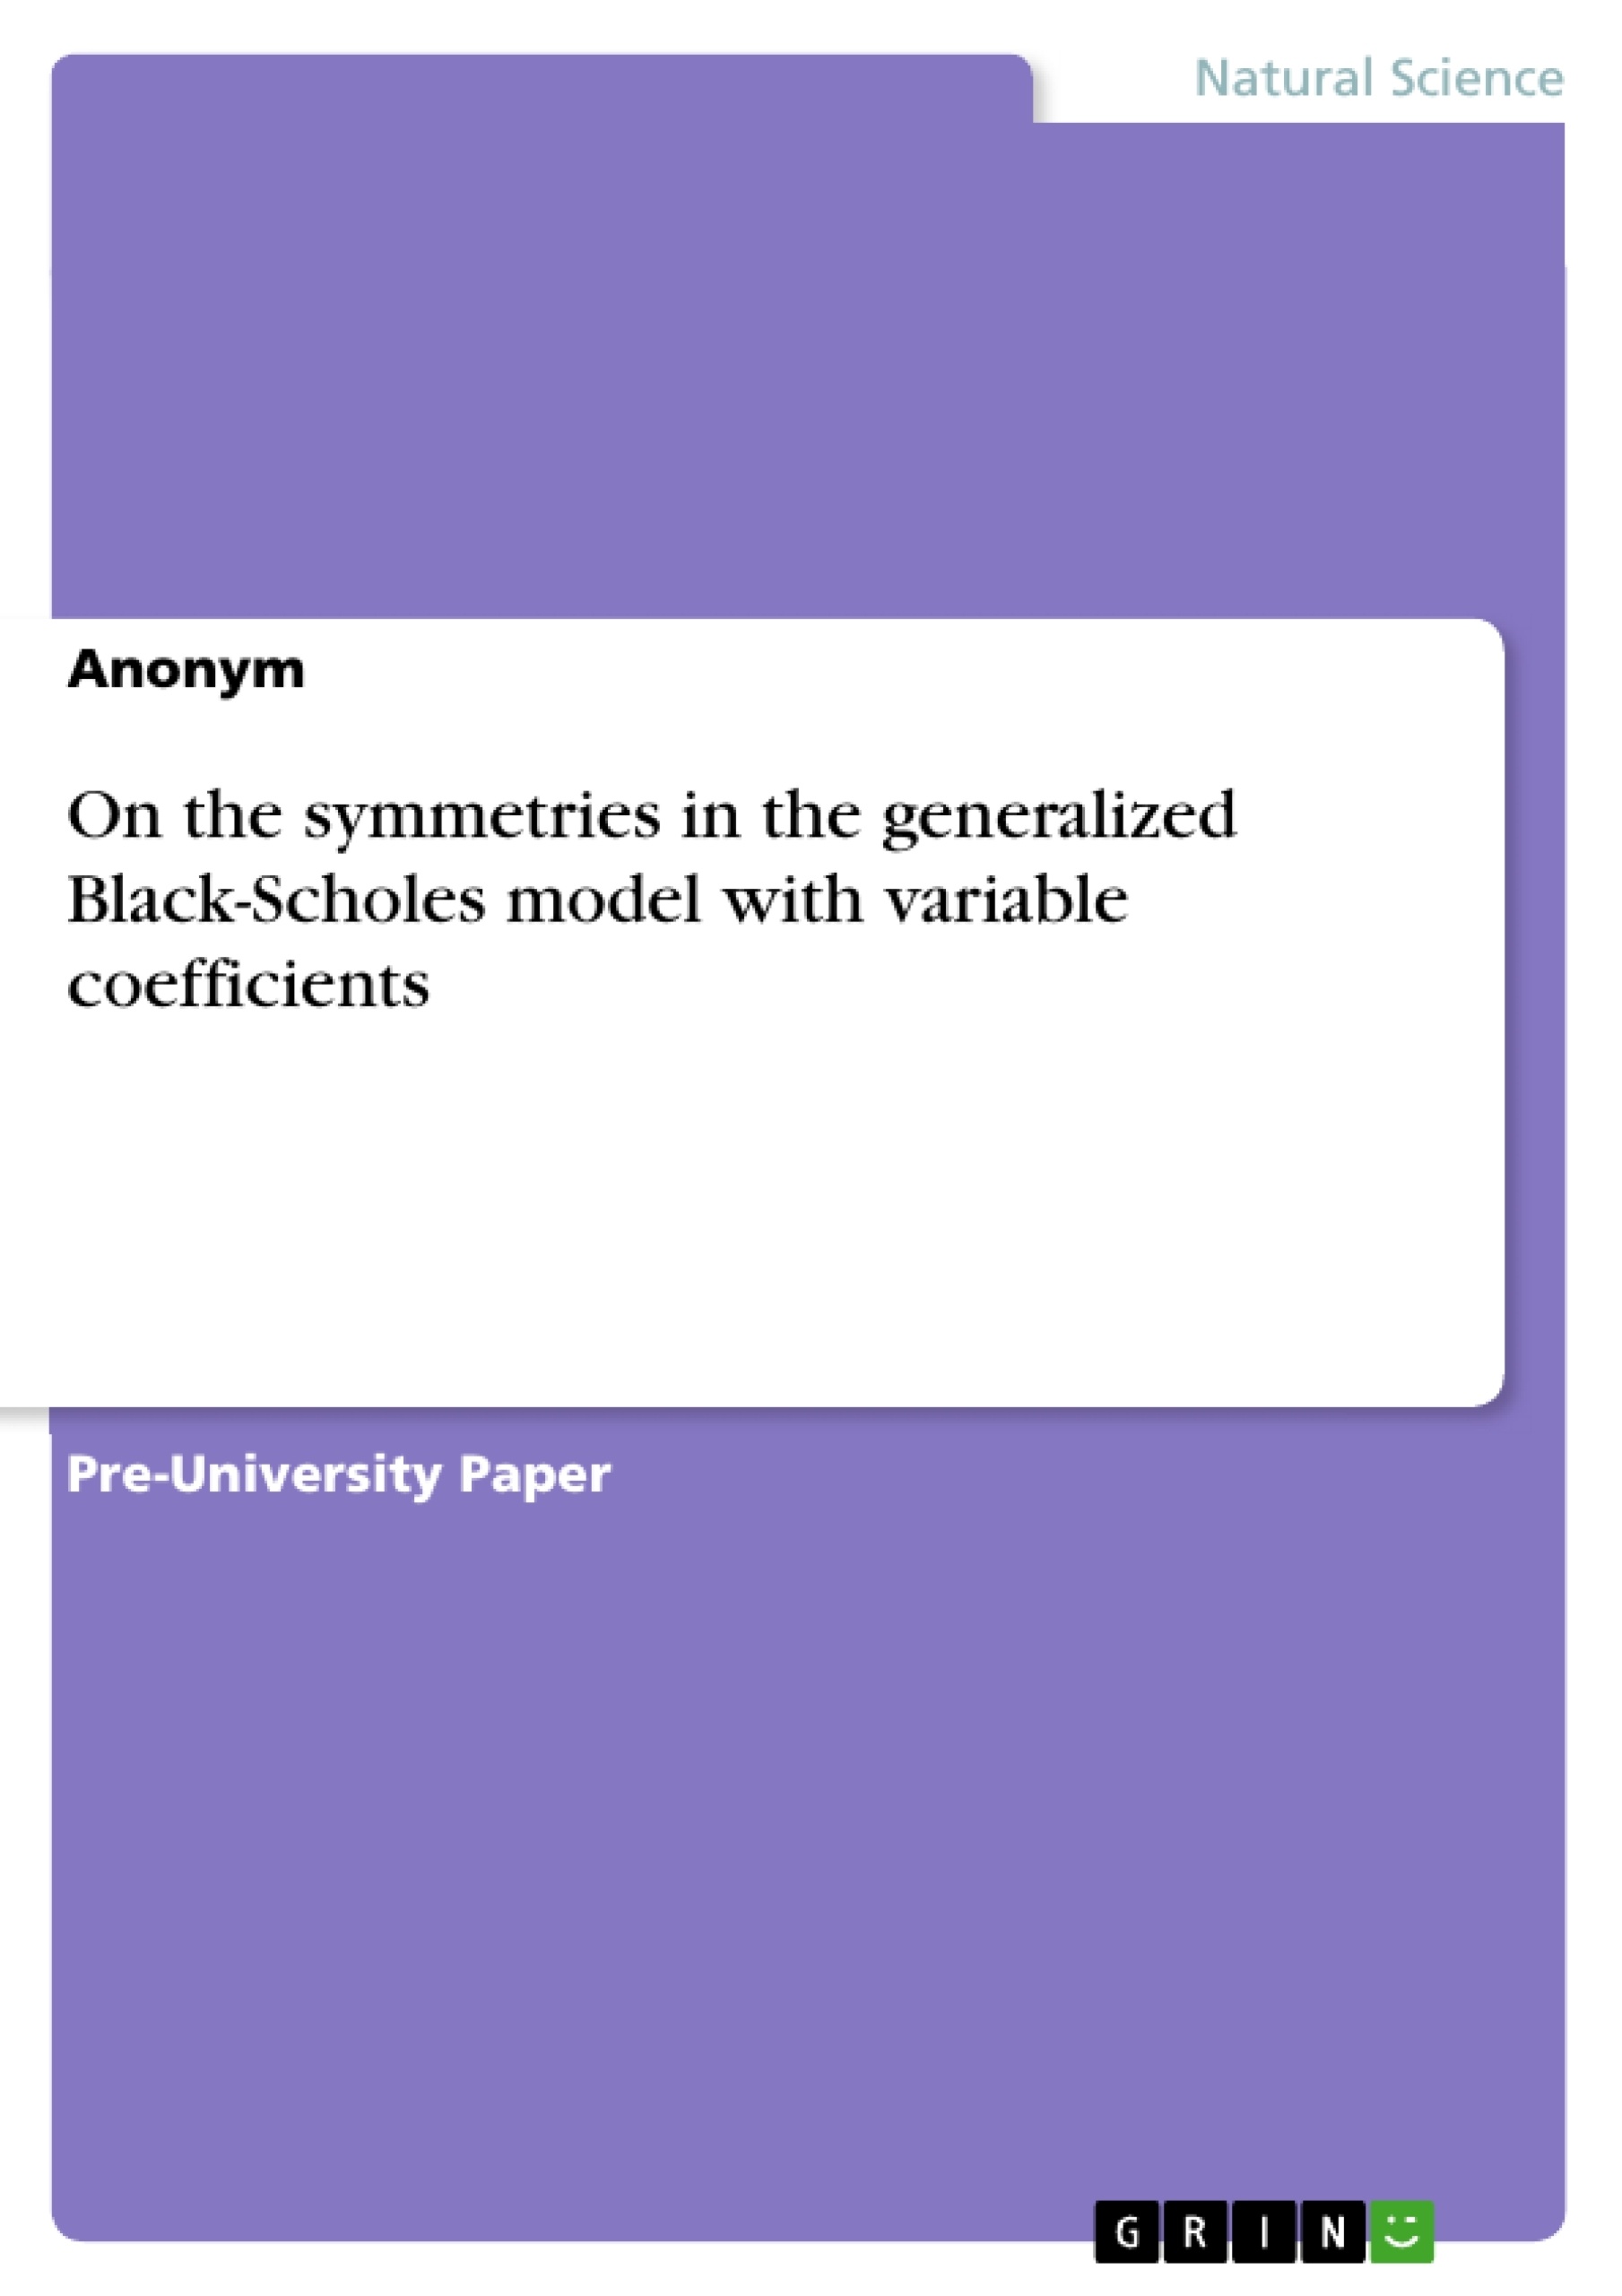 Título: On the symmetries in the generalized Black-Scholes model with variable coefficients